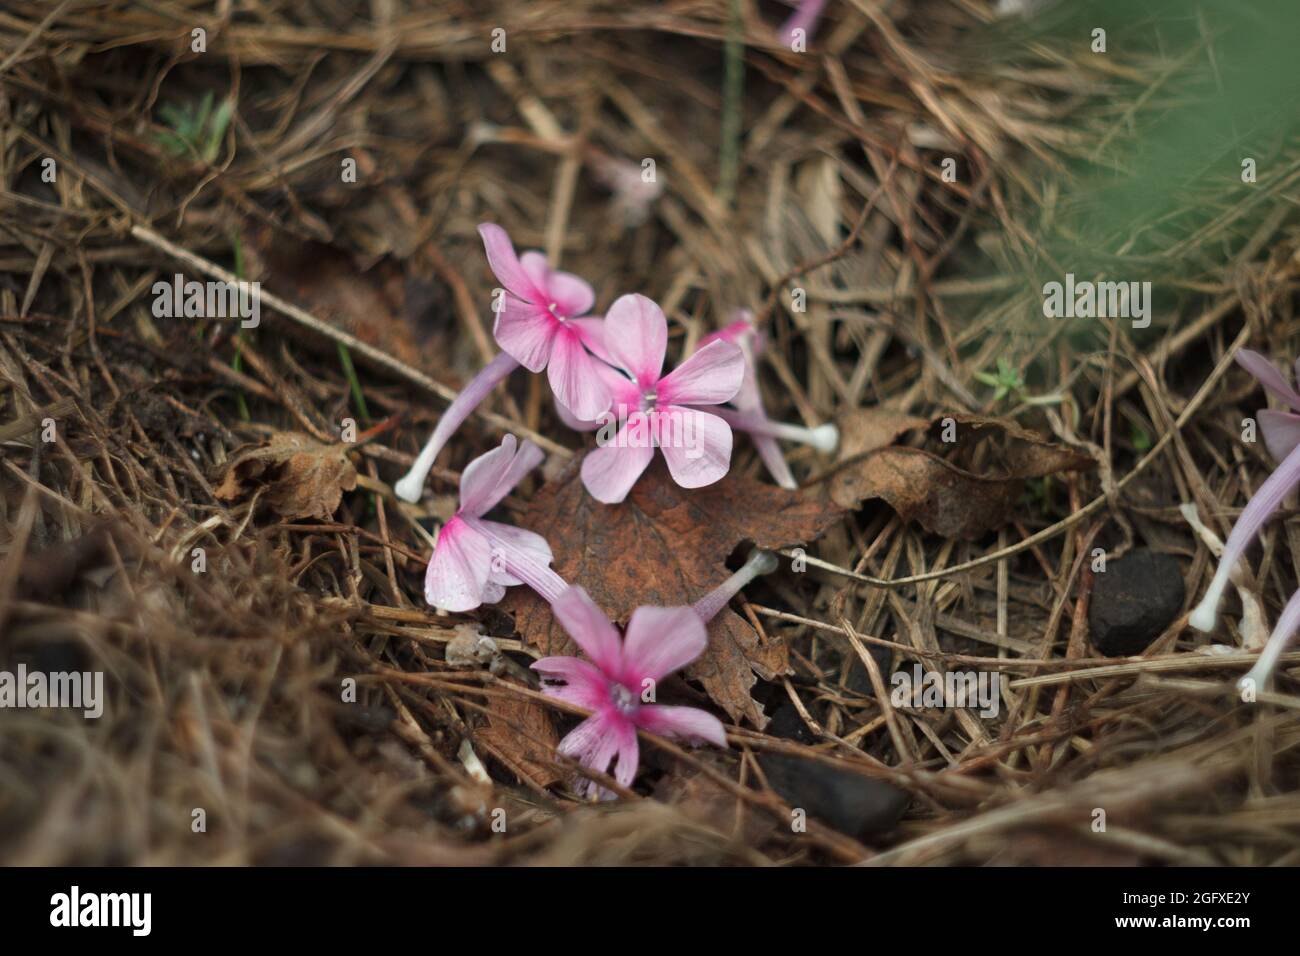 Pink phlox inflorescences on the ground in the summer garden, close up Stock Photo